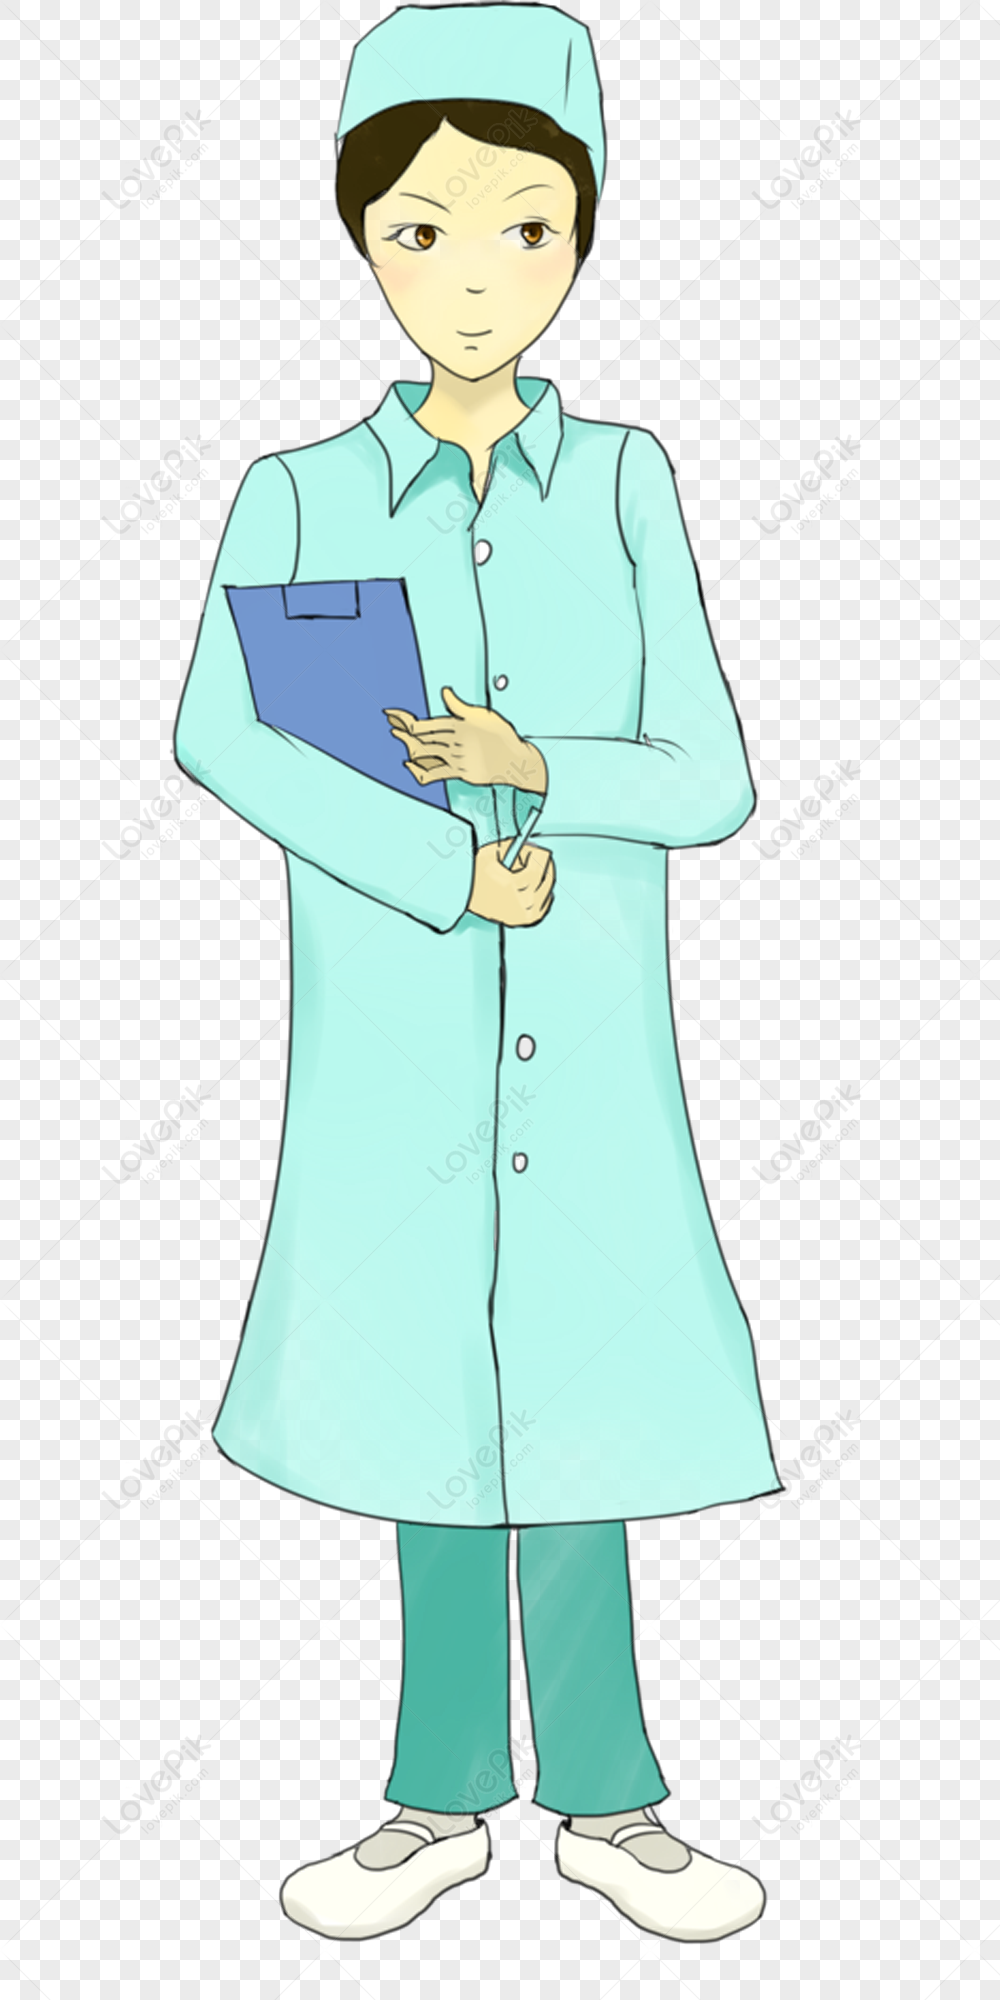 Cartoon Female Nurse PNG Image Free Download And Clipart Image For Free  Download - Lovepik | 400199831